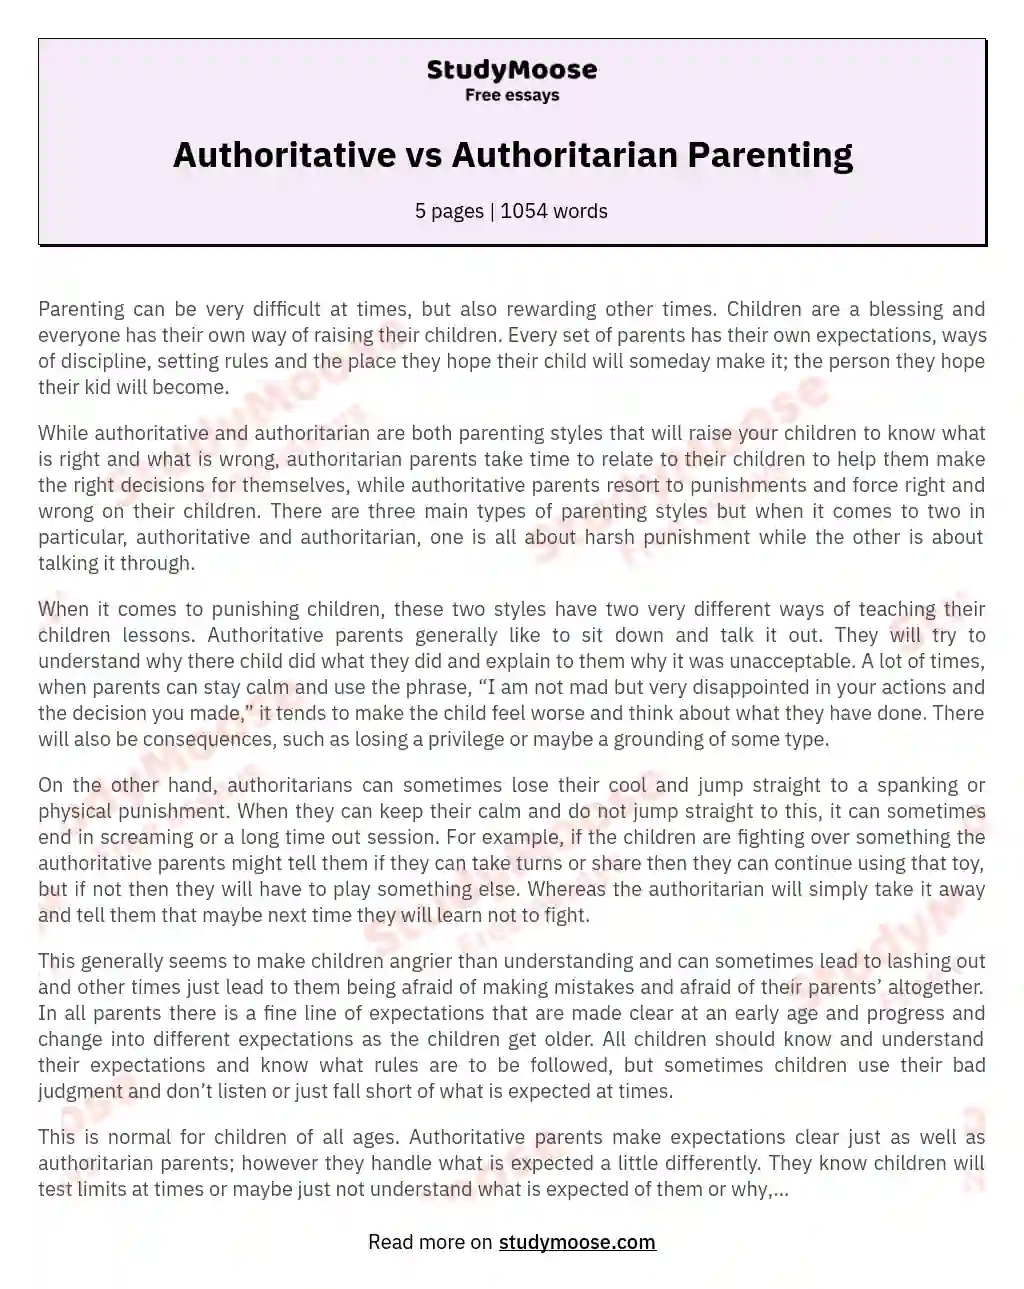 an essay on parenting styles